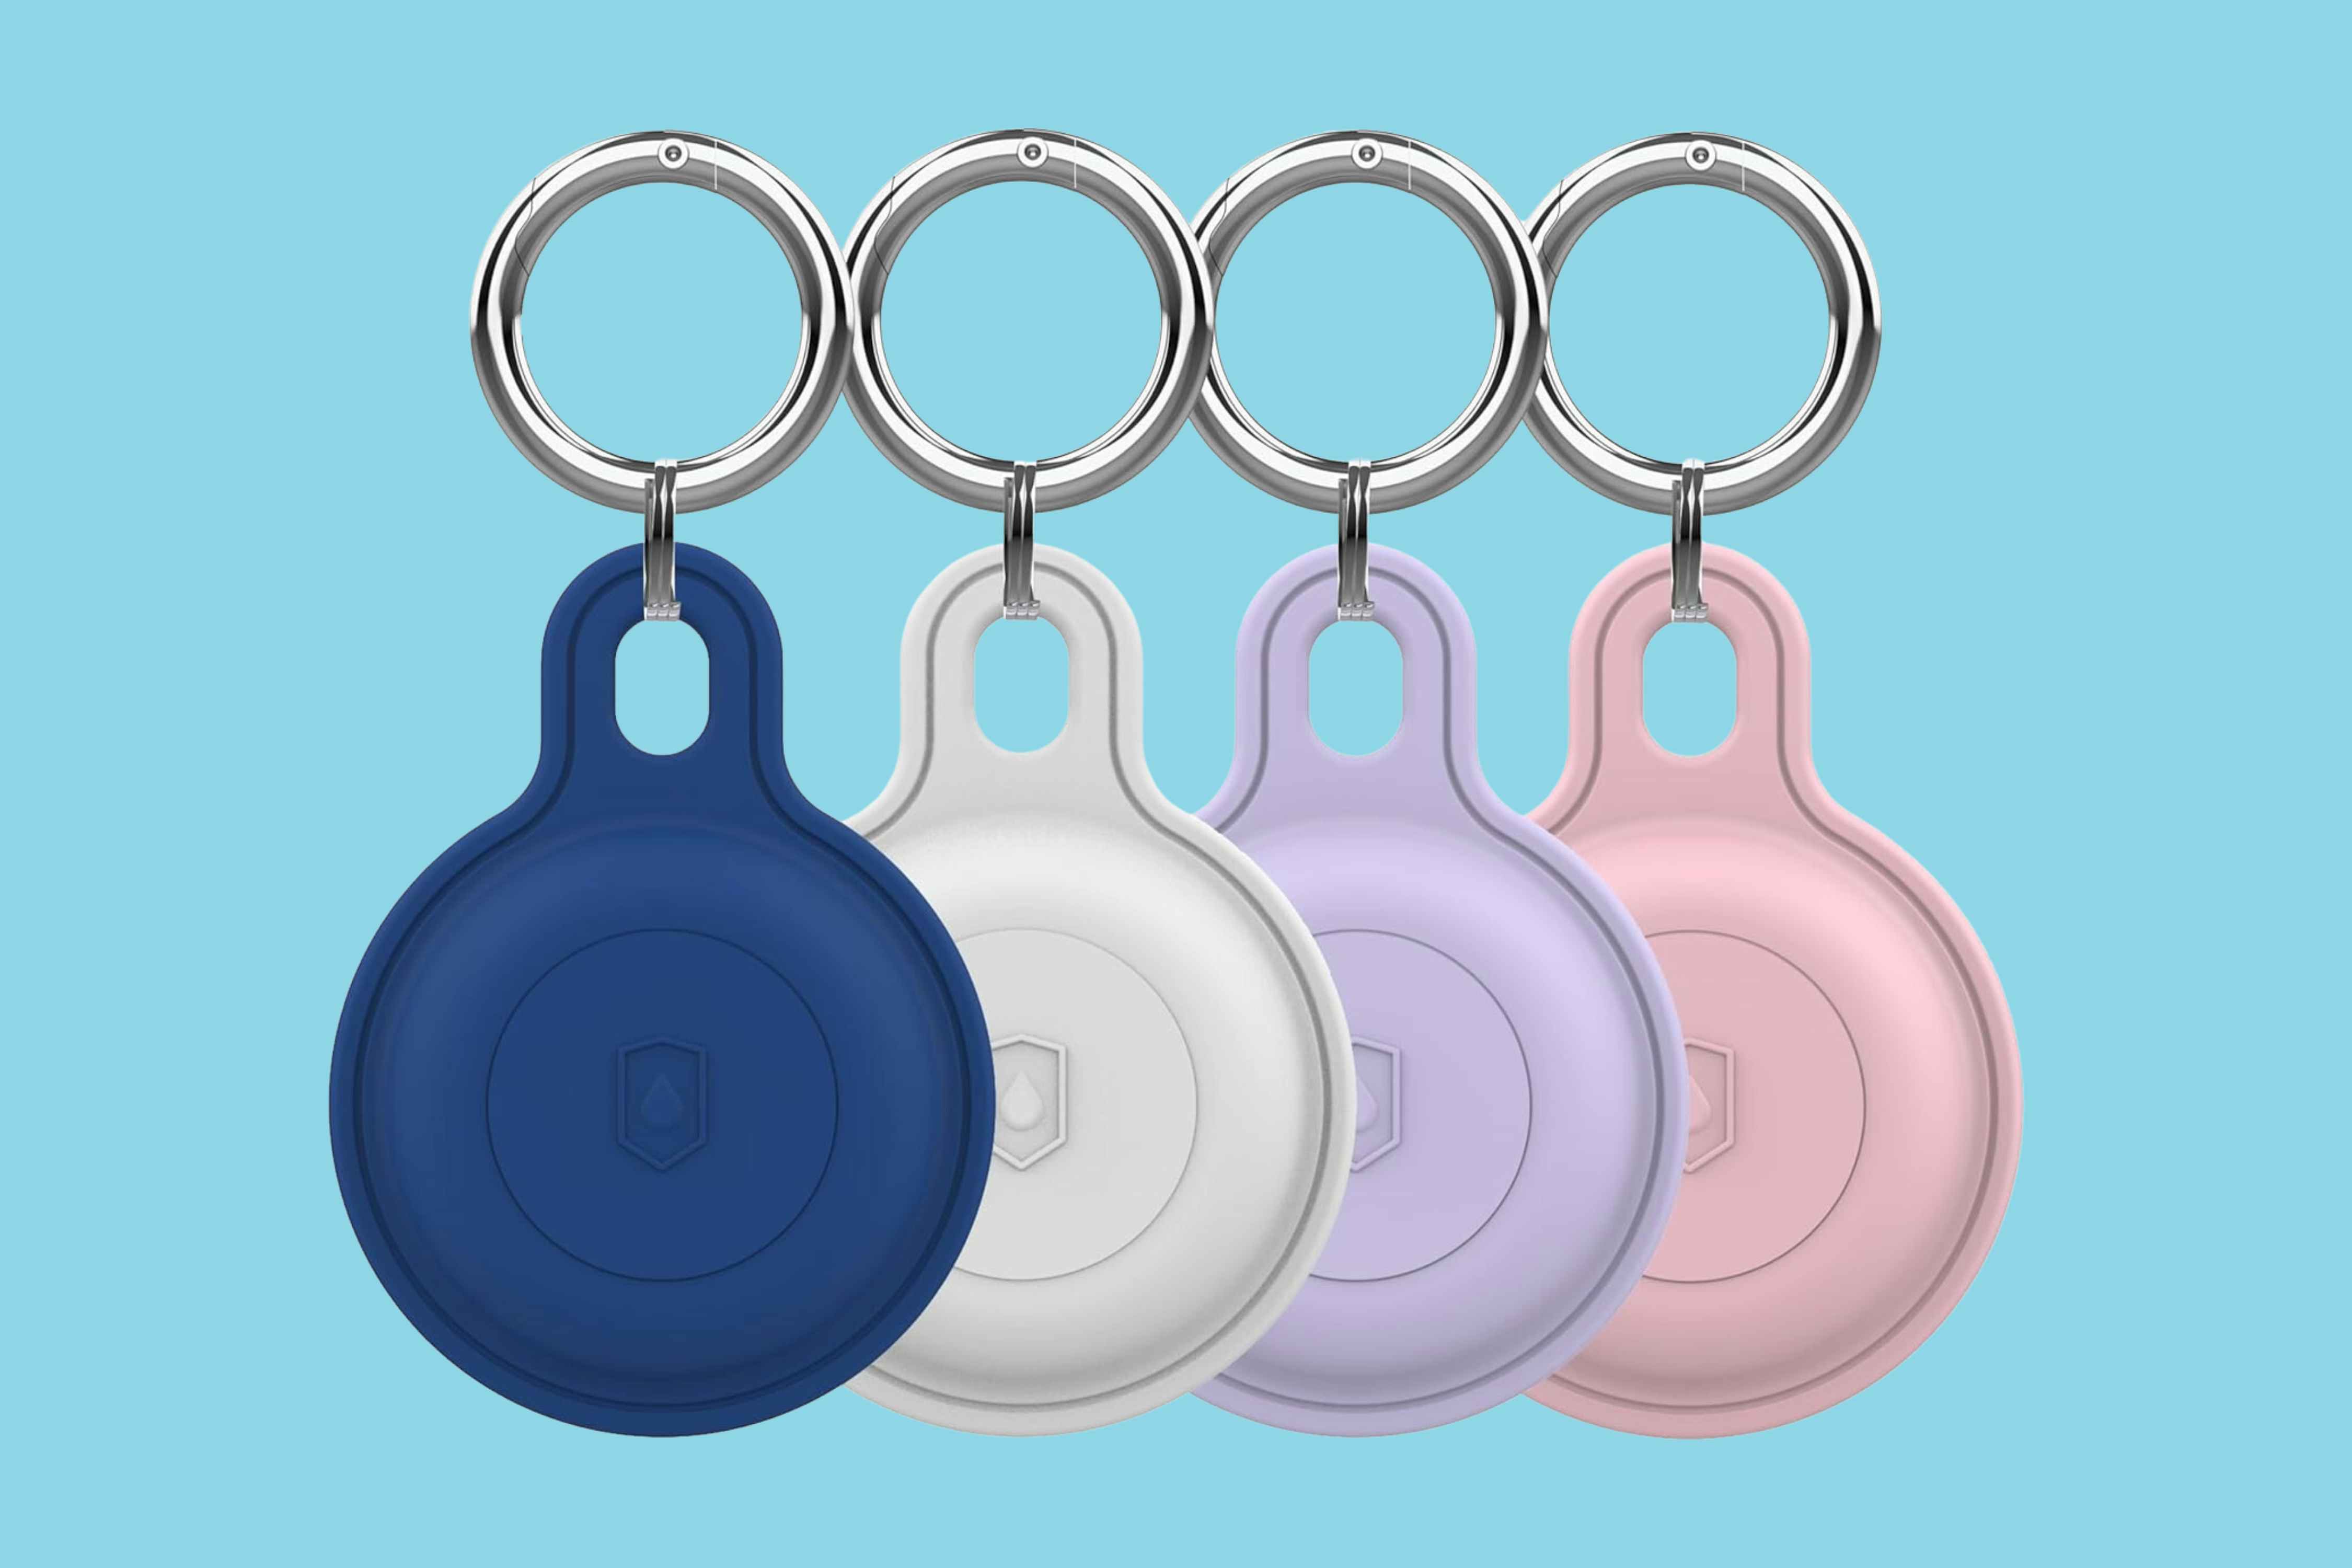 BOGO AirTag Keychain Holders on Amazon — Get 8 for Just $2.99